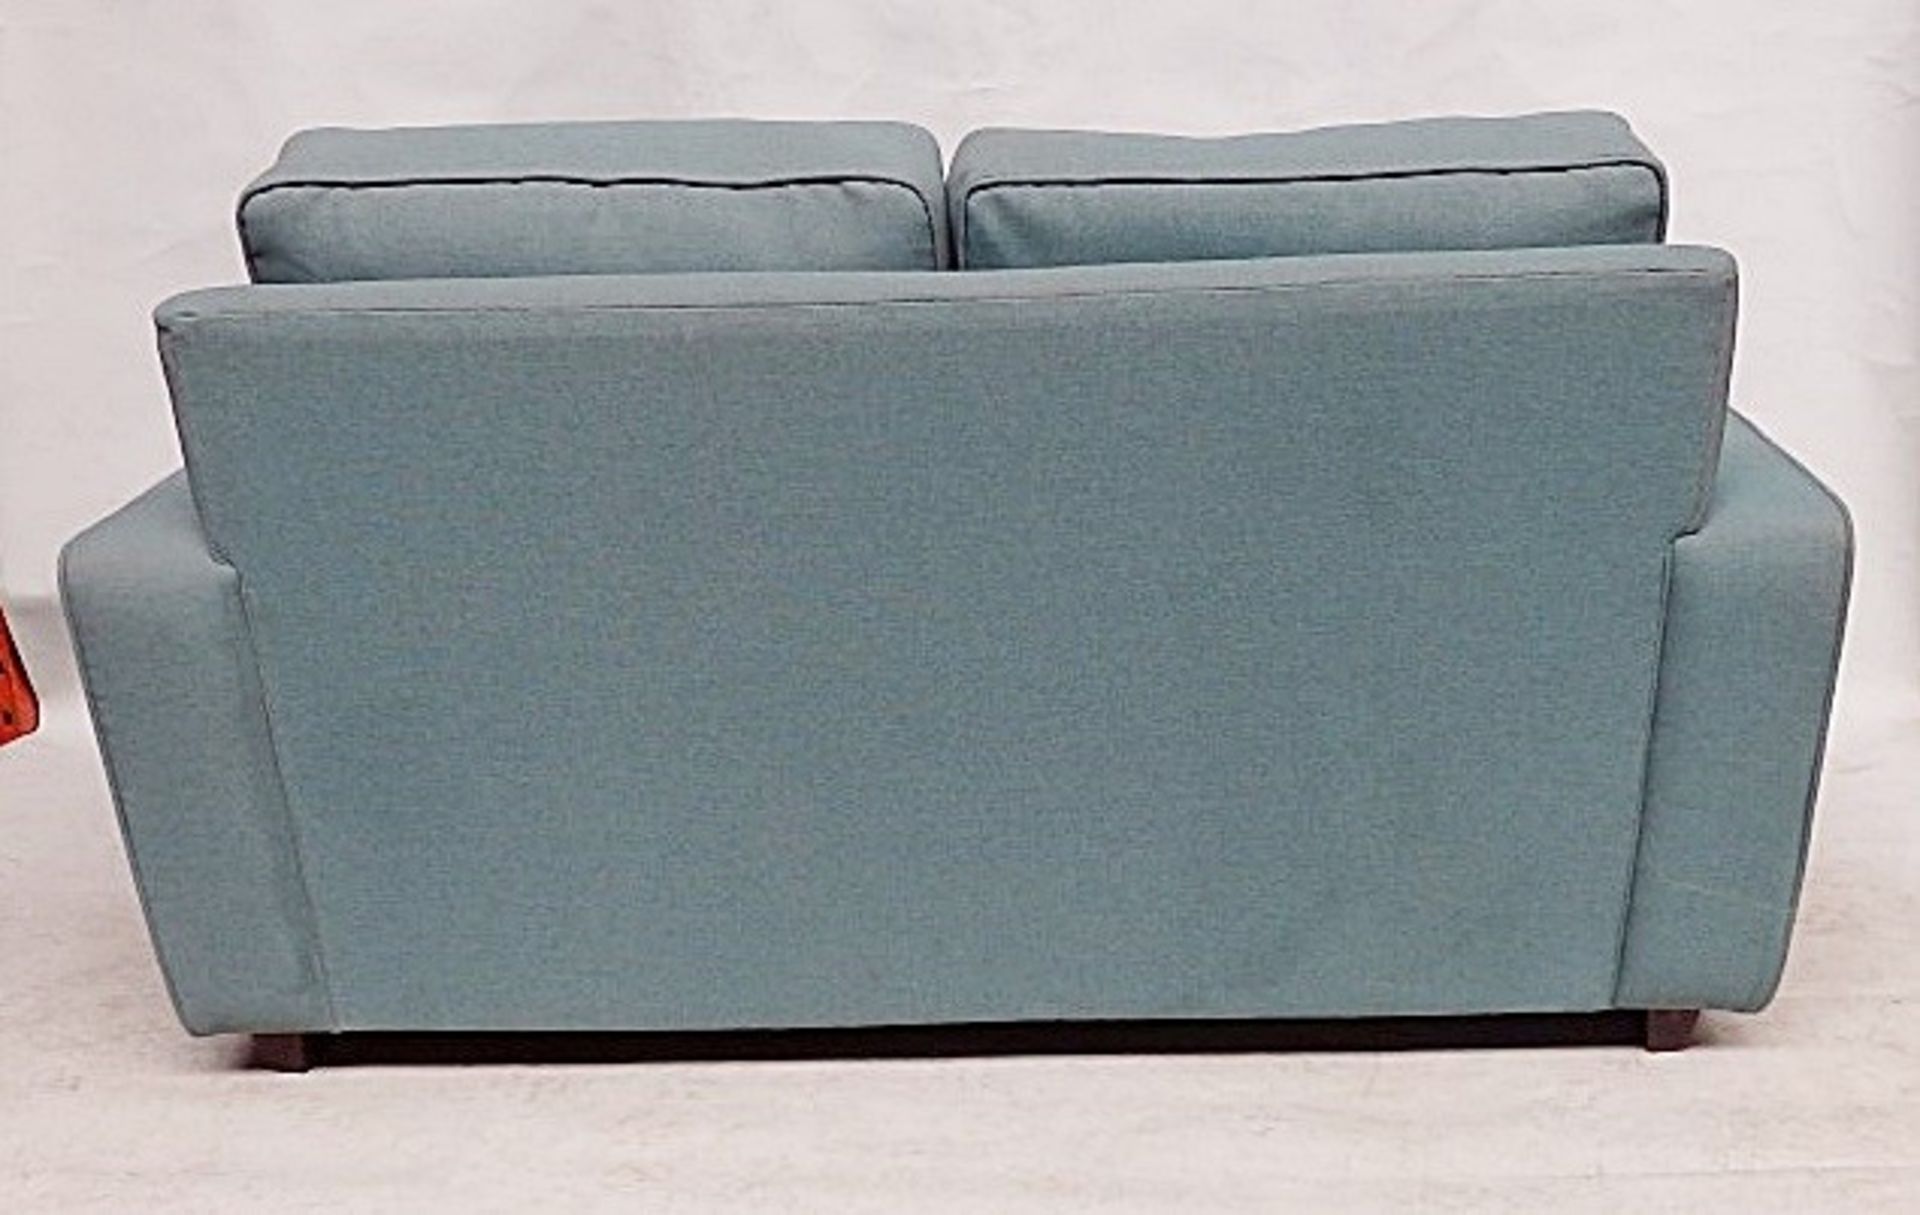 1 x Large Bespoke Turquoise Sofa - Expertly Built And Upholstered By British Craftsmen - Dimensions: - Image 6 of 6